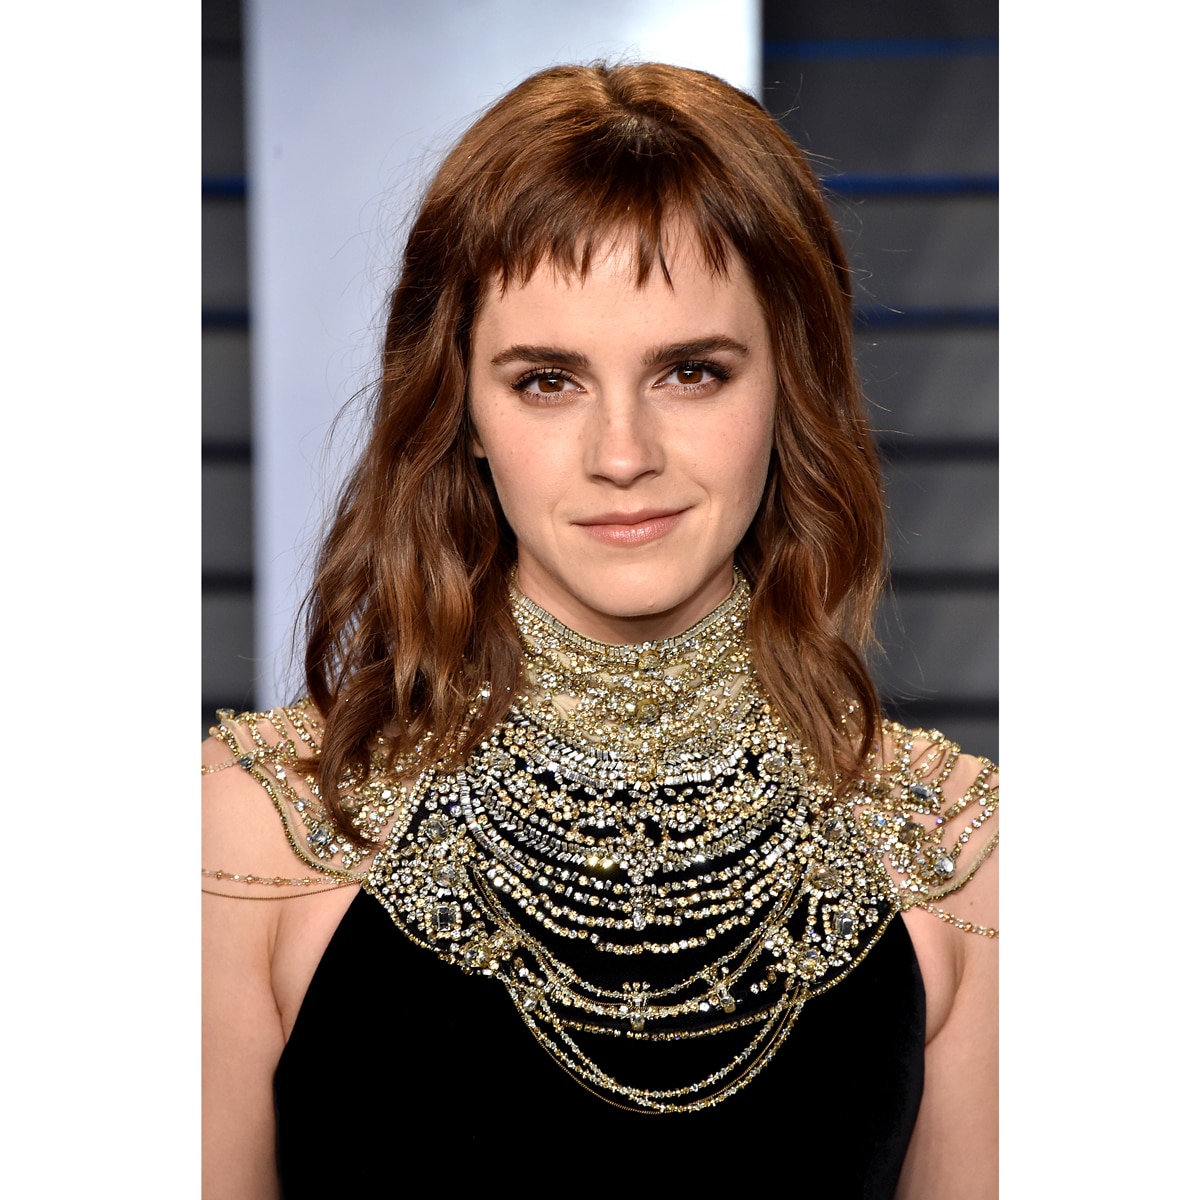 Bulk Amorous Gøre husarbejde Oscars 2018: Emma Watson Gets Haircut with Short Baby Bangs | Style & Living